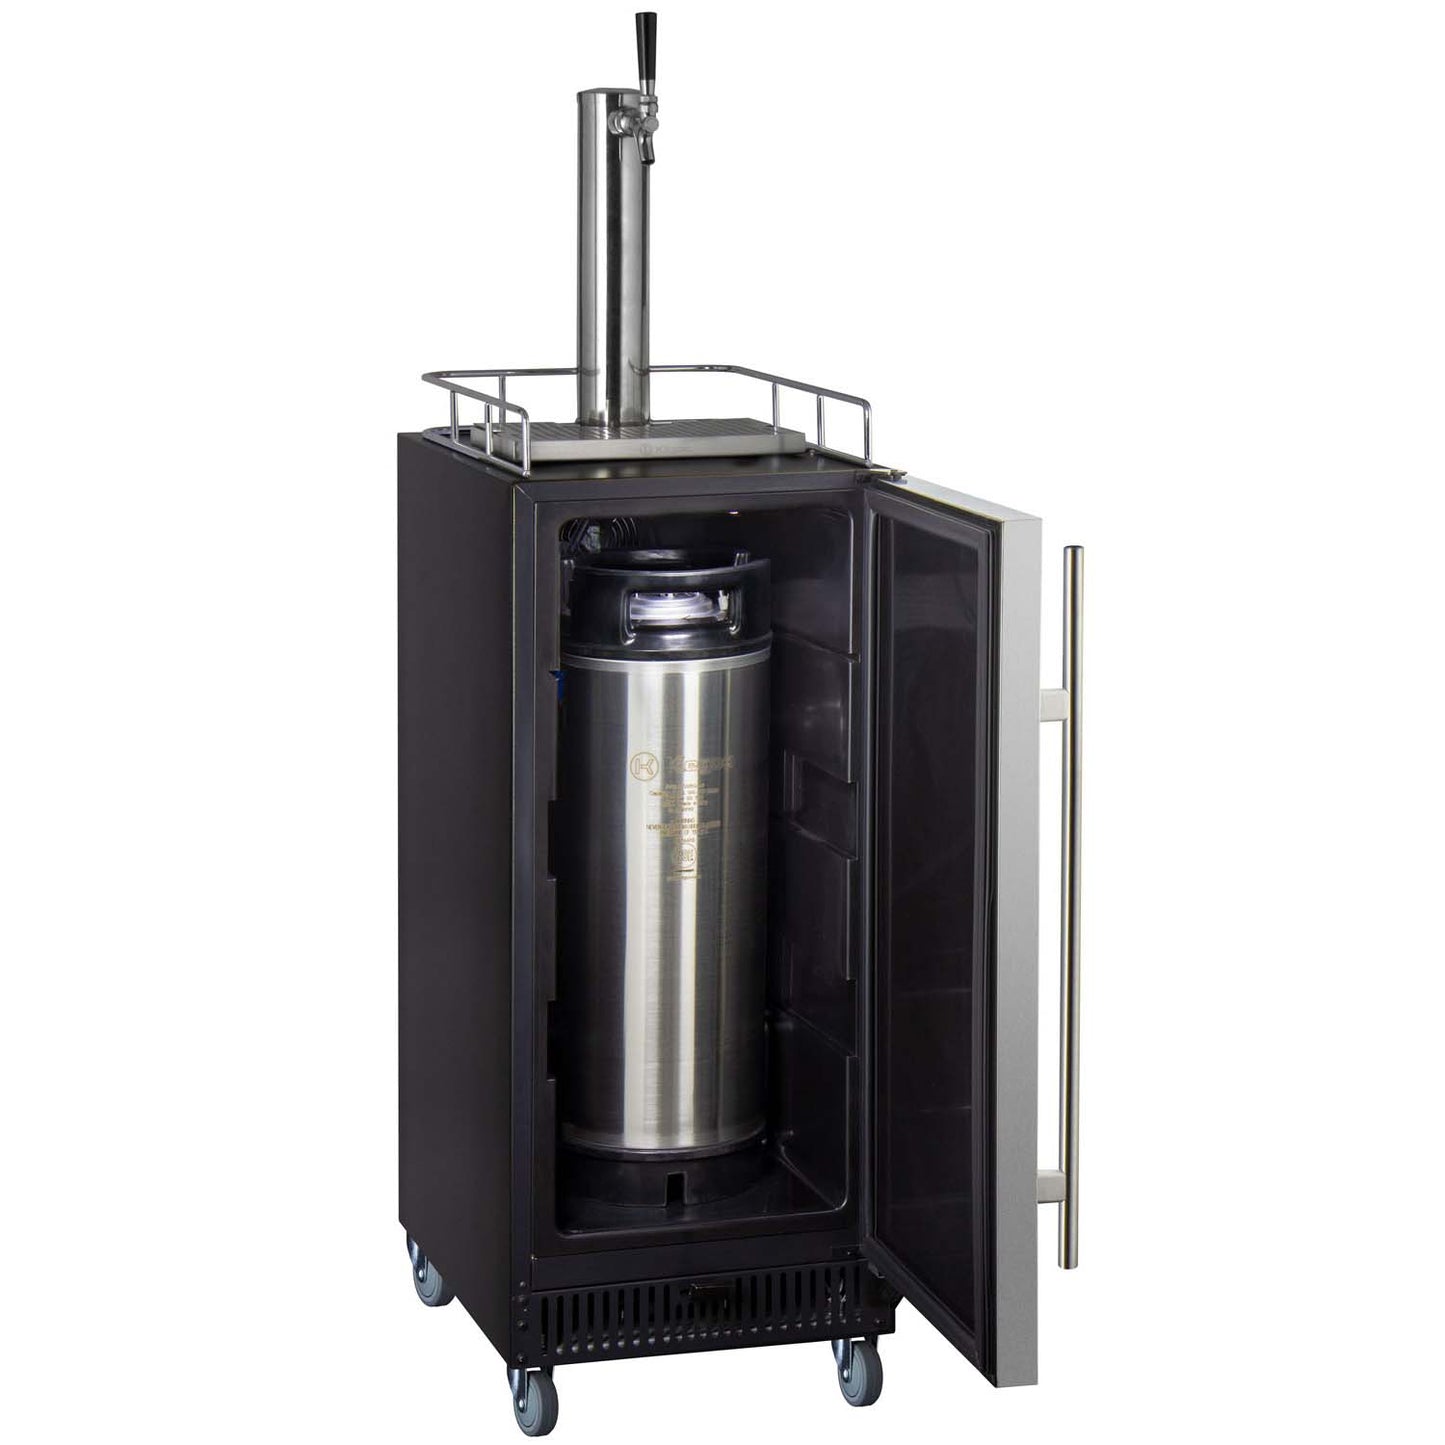 Kegco 15" Wide Single Tap Stainless Steel Kegerator | Commercial Approved